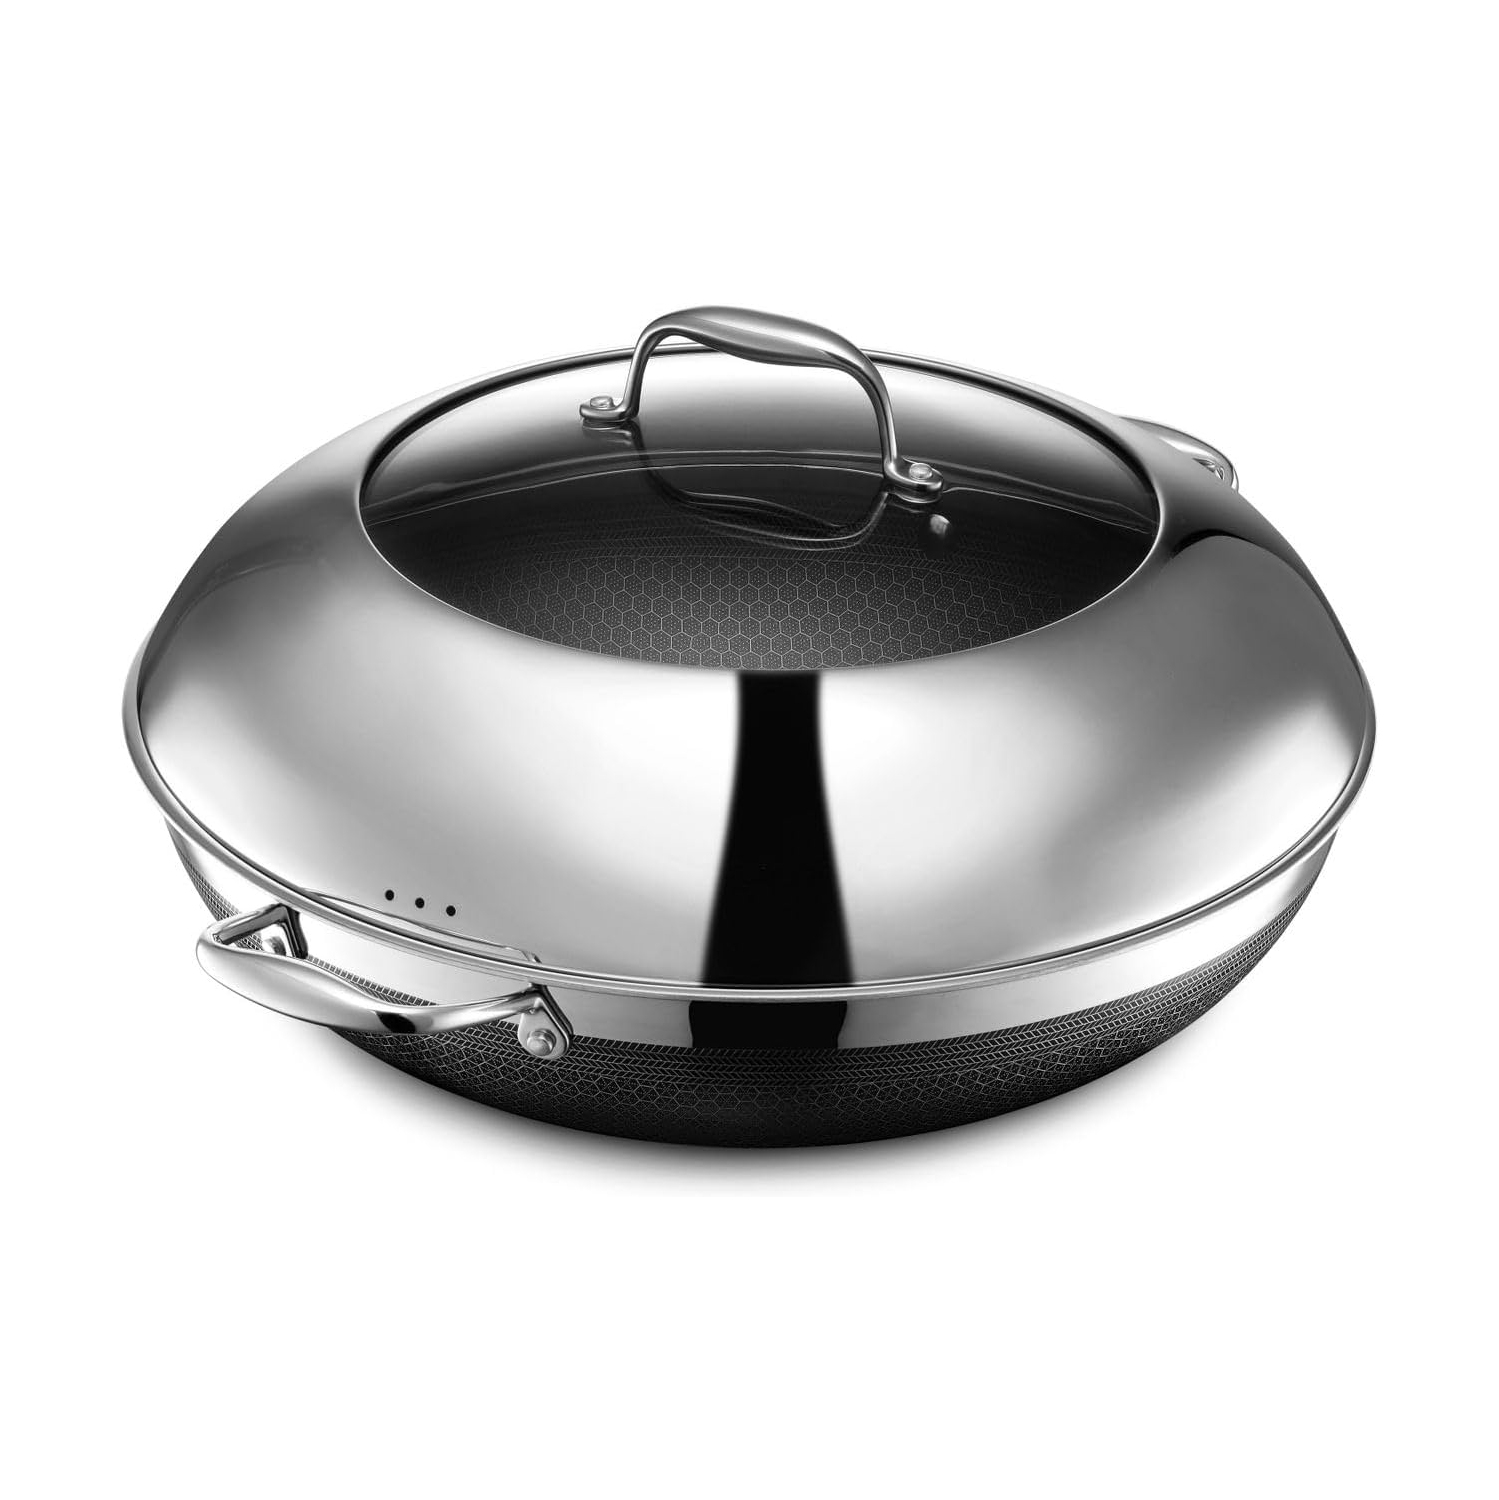 HexClad 14 Inch Hybrid Nonstick Wok and Lid, Dishwasher and Oven Friendly, Compatible with All Cooktops